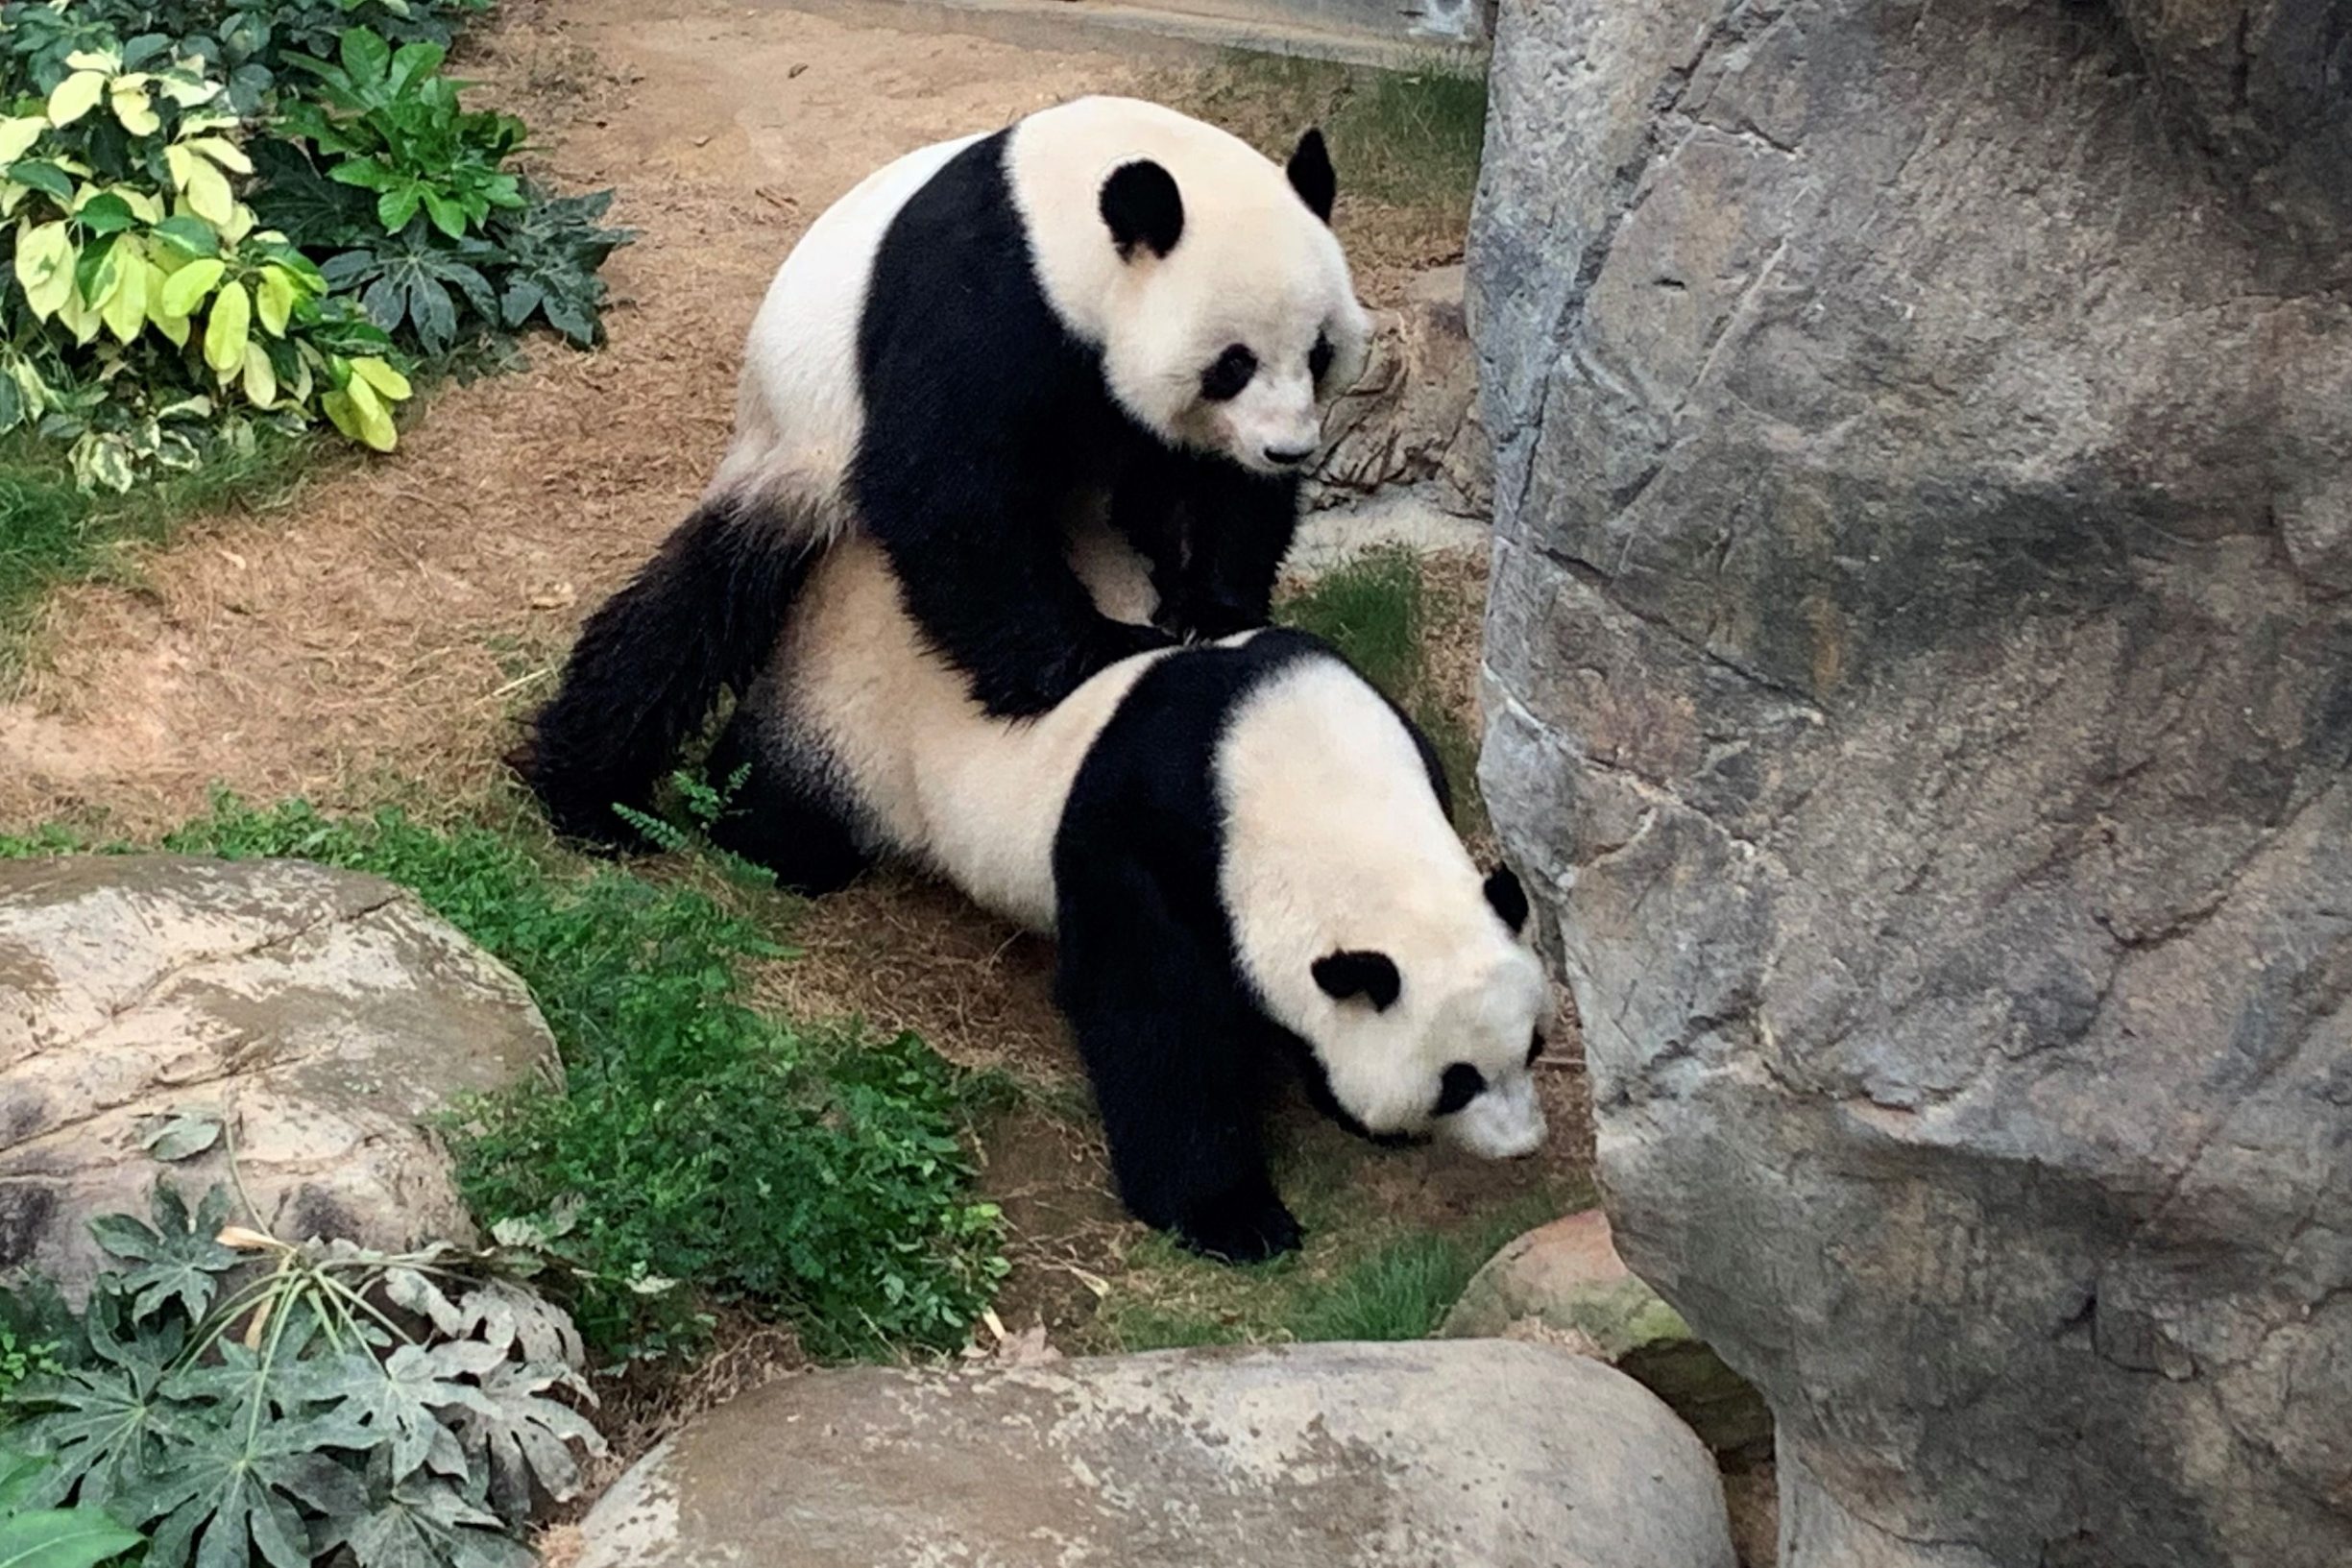 This handout photo provided by Ocean Park Hong Kong on April 7, 2020 shows giant pandas Ying Ying and Le Le mating at Ocean Park in Hong Kong on April 6, 2020. - Stuck at home with no visitors and not much else to do, a pair of pandas in Hong Kong finally decided to give mating a go after a decade of dodging the issue. (Photo by Handout / Ocean Park Hong Kong / AFP) / RESTRICTED TO EDITORIAL USE - MANDATORY CREDIT 